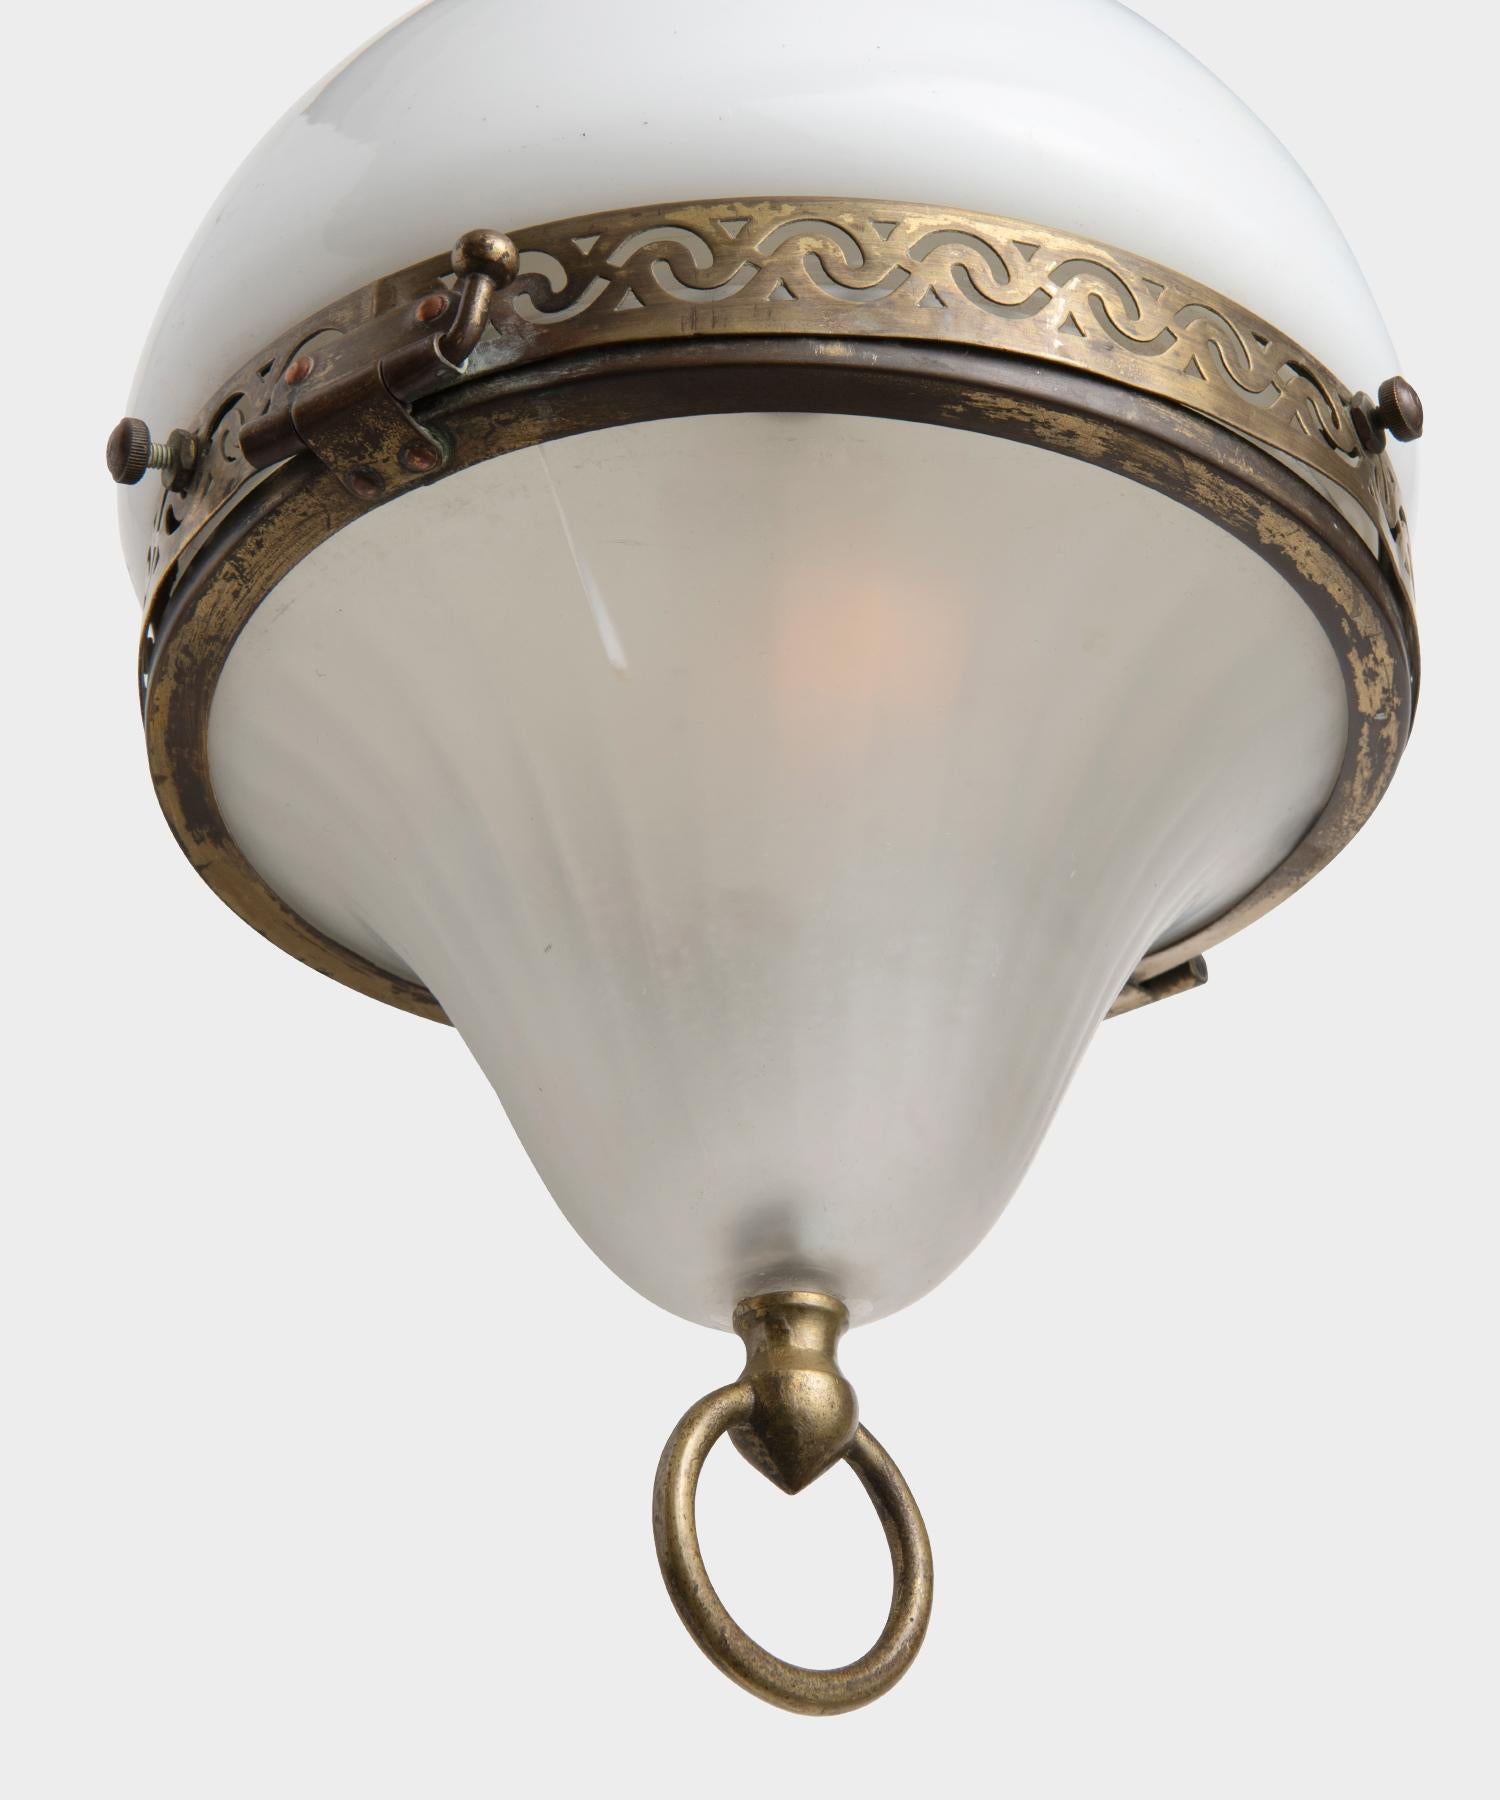 Petite opaline and frosted glass pendant with ornate brass details. Small crack in lower shade, shown in photos.
    